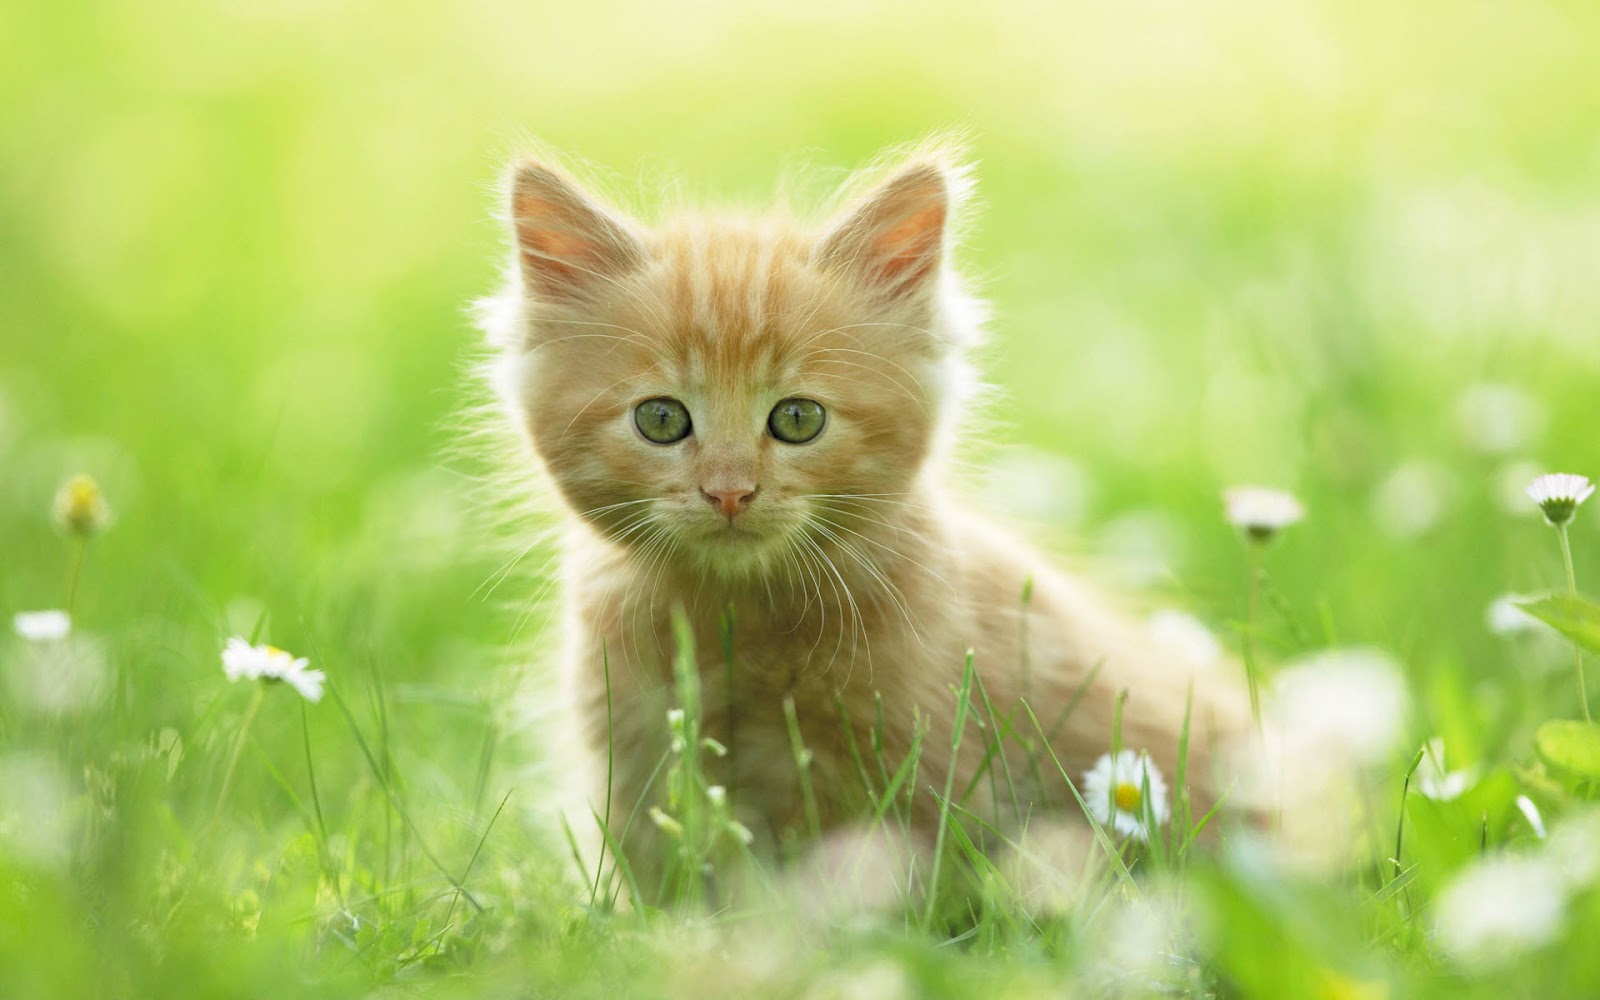 See My Cute Puppies And Kittens Wallpaper Collection